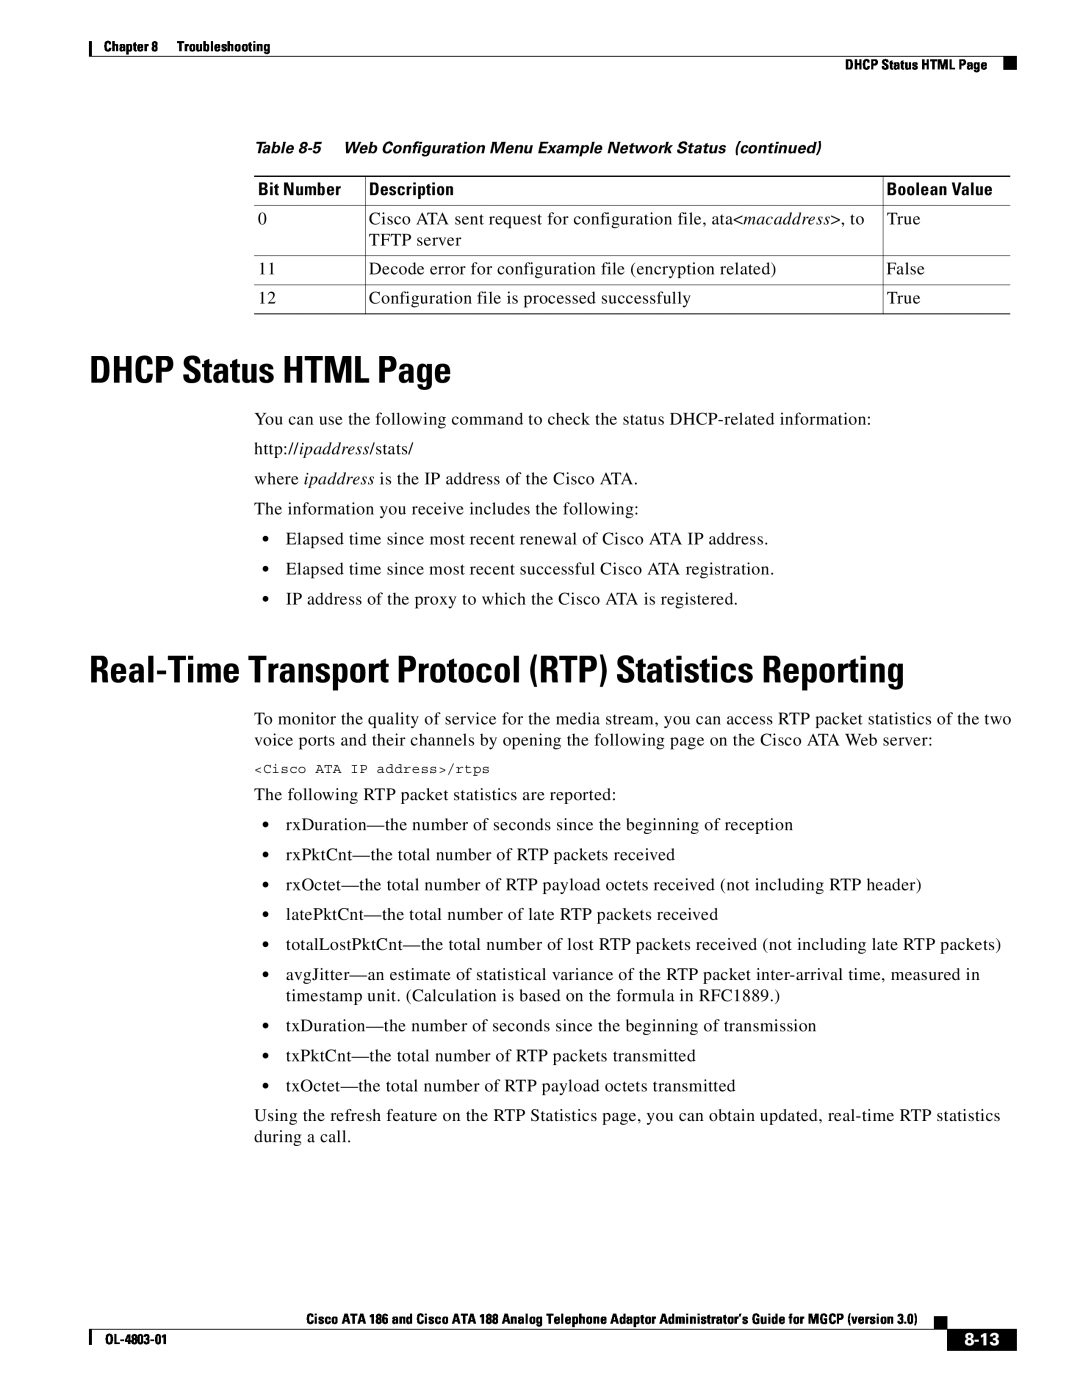 Cisco Systems ATA 186 DHCP Status HTML Page, Real-Time Transport Protocol RTP Statistics Reporting, 8-13, Description 